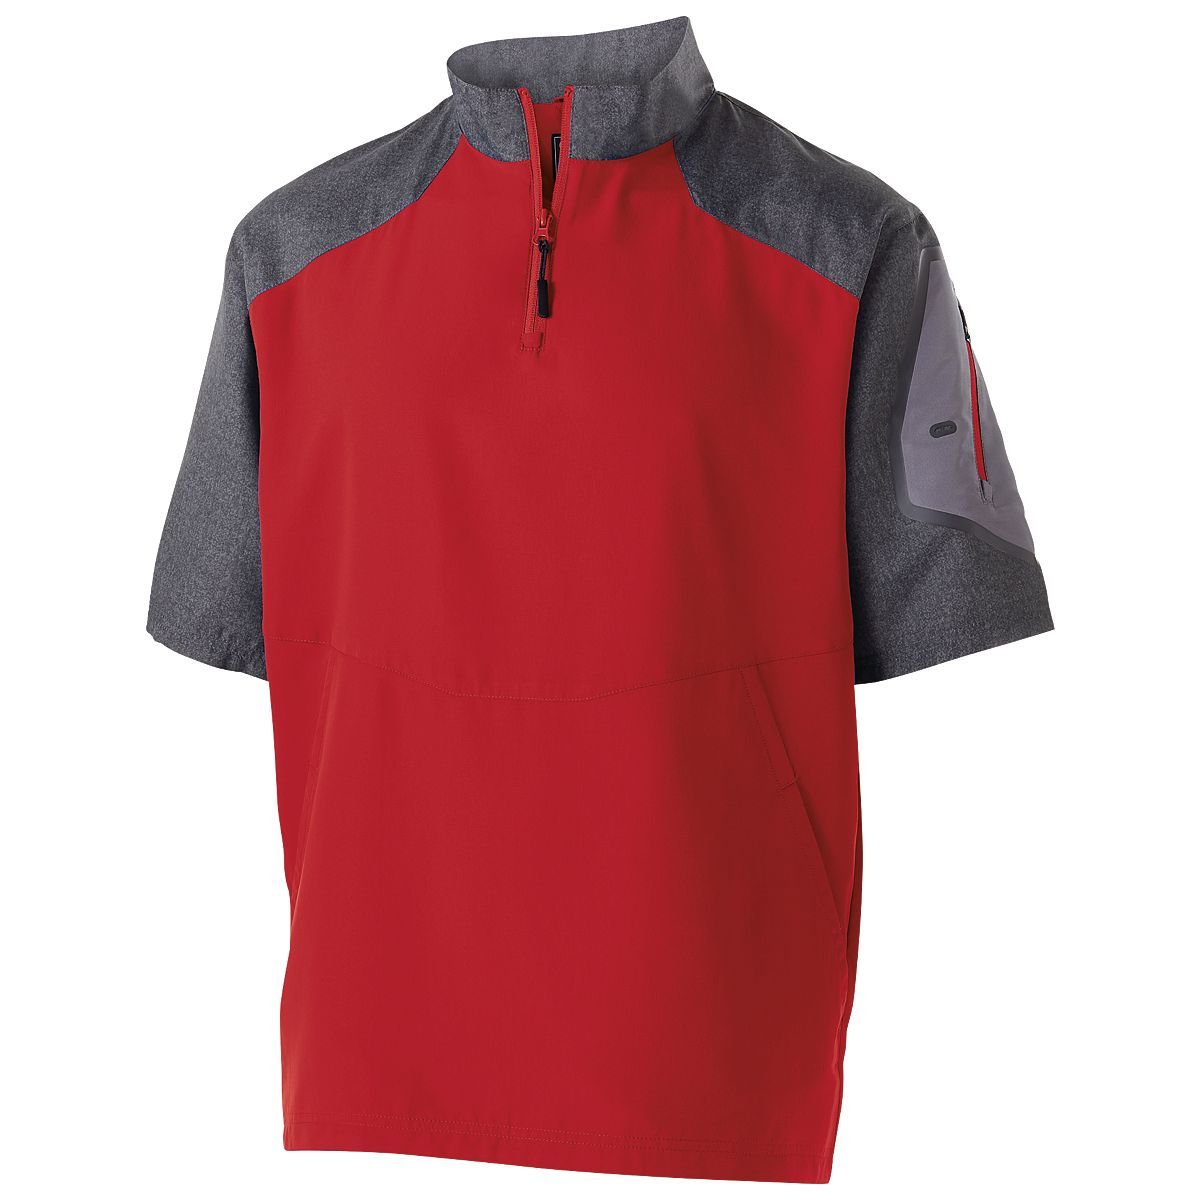 Holloway Raider  Short Sleeve Pullover in Carbon Print/Scarlet  -Part of the Adult, Adult-Pullover, Holloway, Outerwear product lines at KanaleyCreations.com